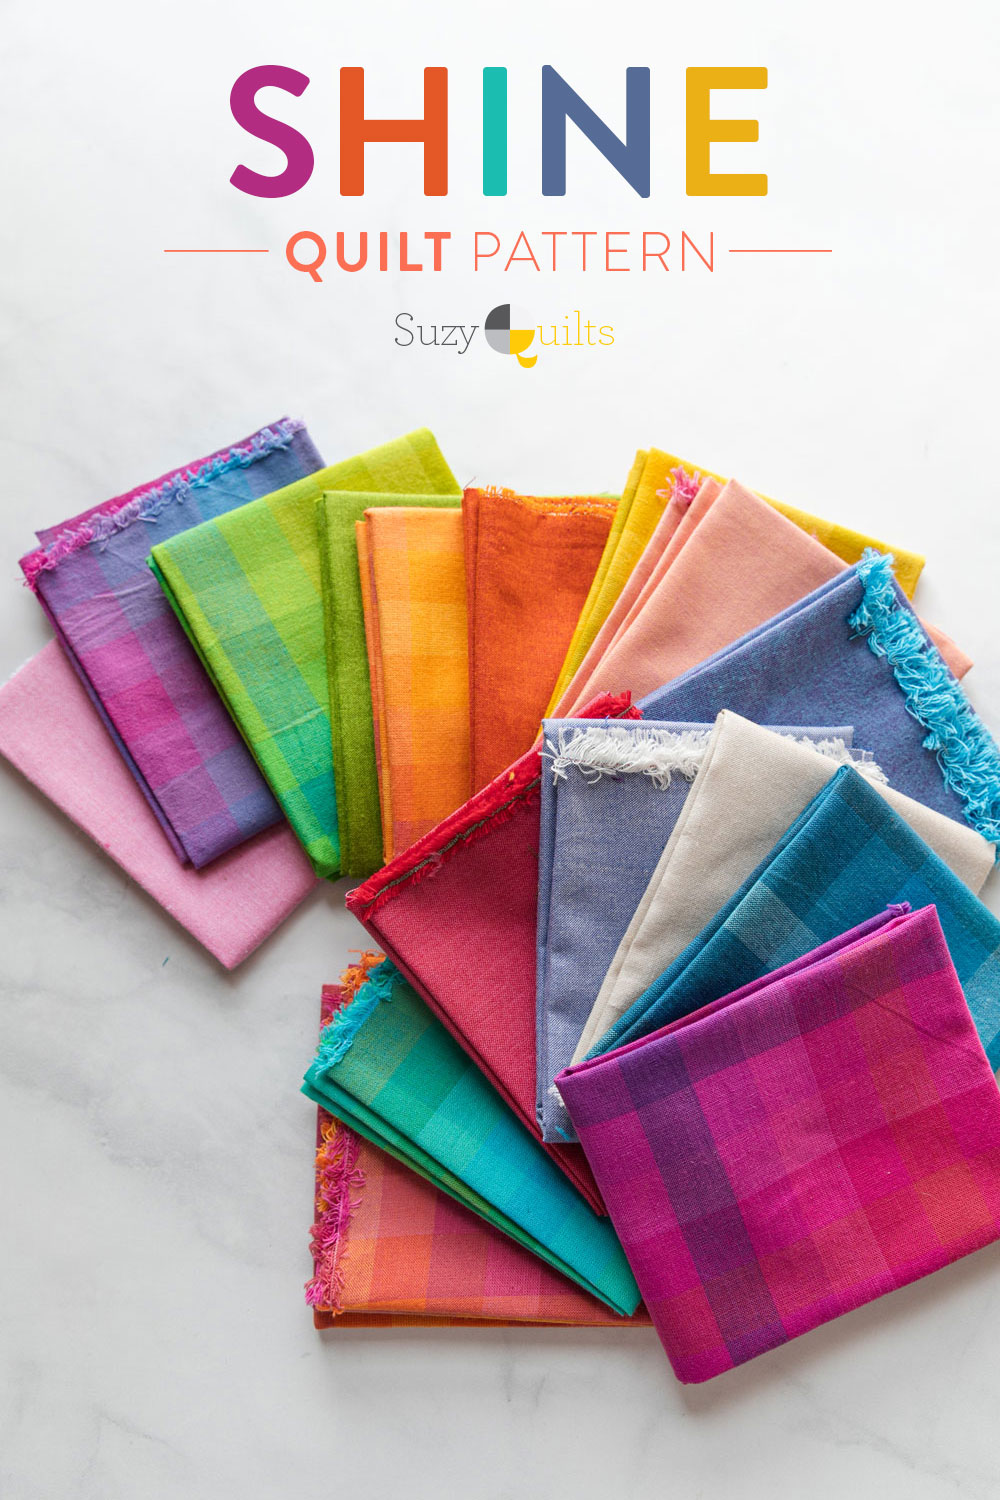 The Shine quilt sew along includes lots of added tips and videos to help you make this modern quilt pattern. This fat quarter quilt pattern is beginner friendly and focuses on improv sewing. suzyquilts.com #modernquilt #quiltfabric